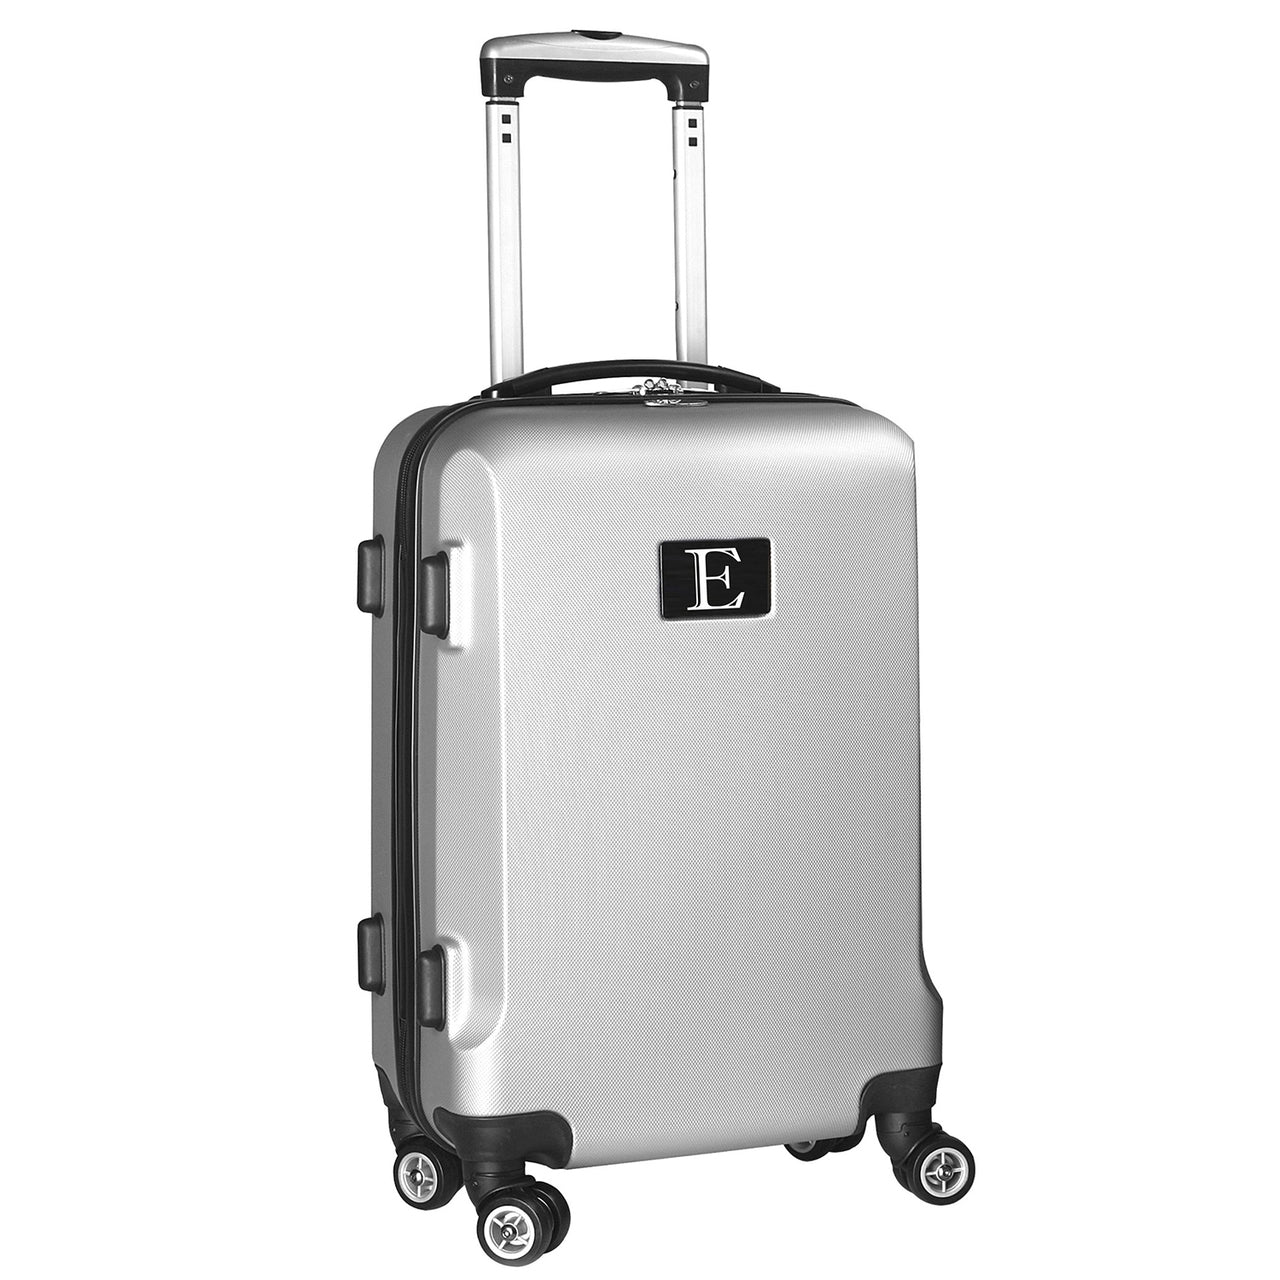 Personalized Initial Name letter "E" 20 inches Carry on Hardcase Spinner Luggage by Mojo in SILVER